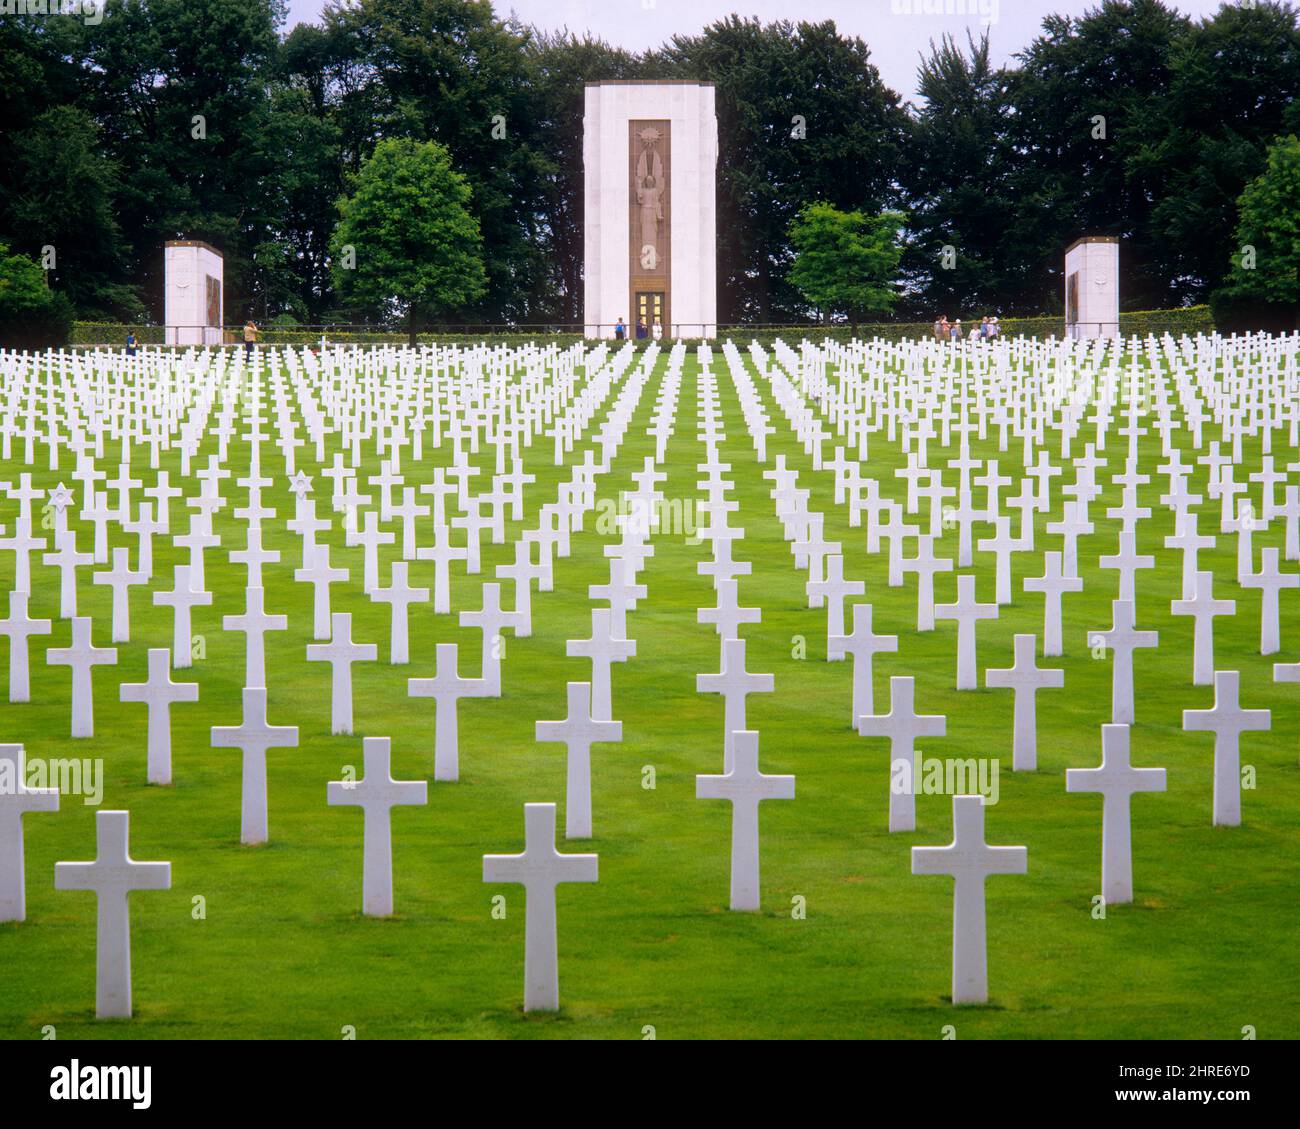 1980s WORLD WAR II AMERICAN MILITARY CEMETERY AND MEMORIAL GENERAL GEORGE PATTON IS BURIED HERE LUXEMBOURG CITY LUXEMBOURG - kc10614 HAR001 HARS OLD FASHIONED Stock Photo